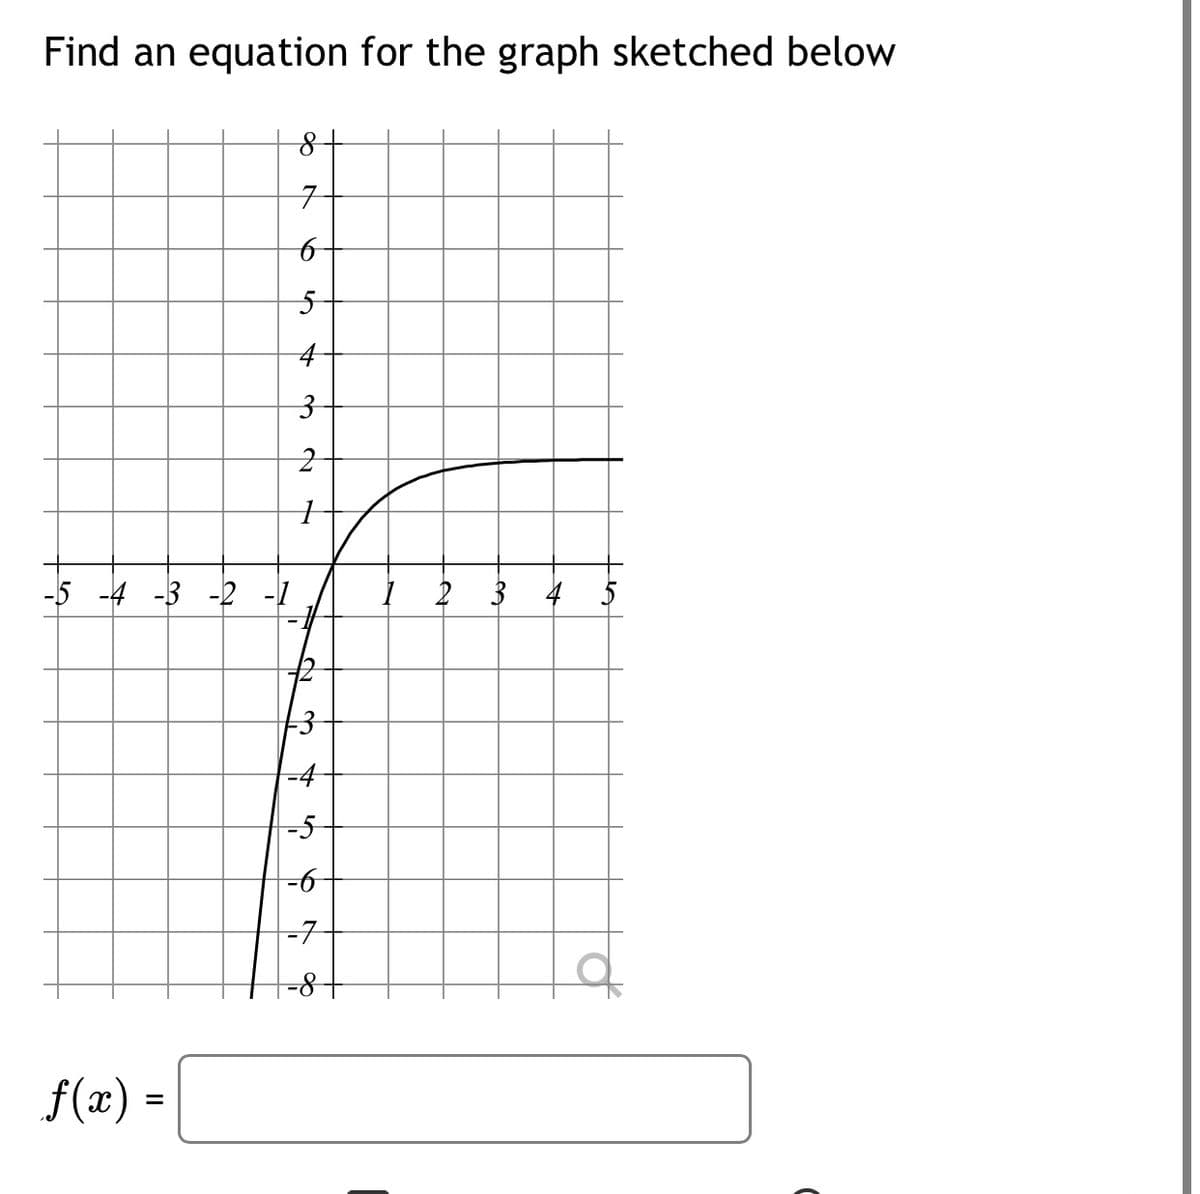 Find an equation for the graph sketched below
구
to
-4 -3 -2 -1
I 2 3 4
-4
--
-7
f(x) =
